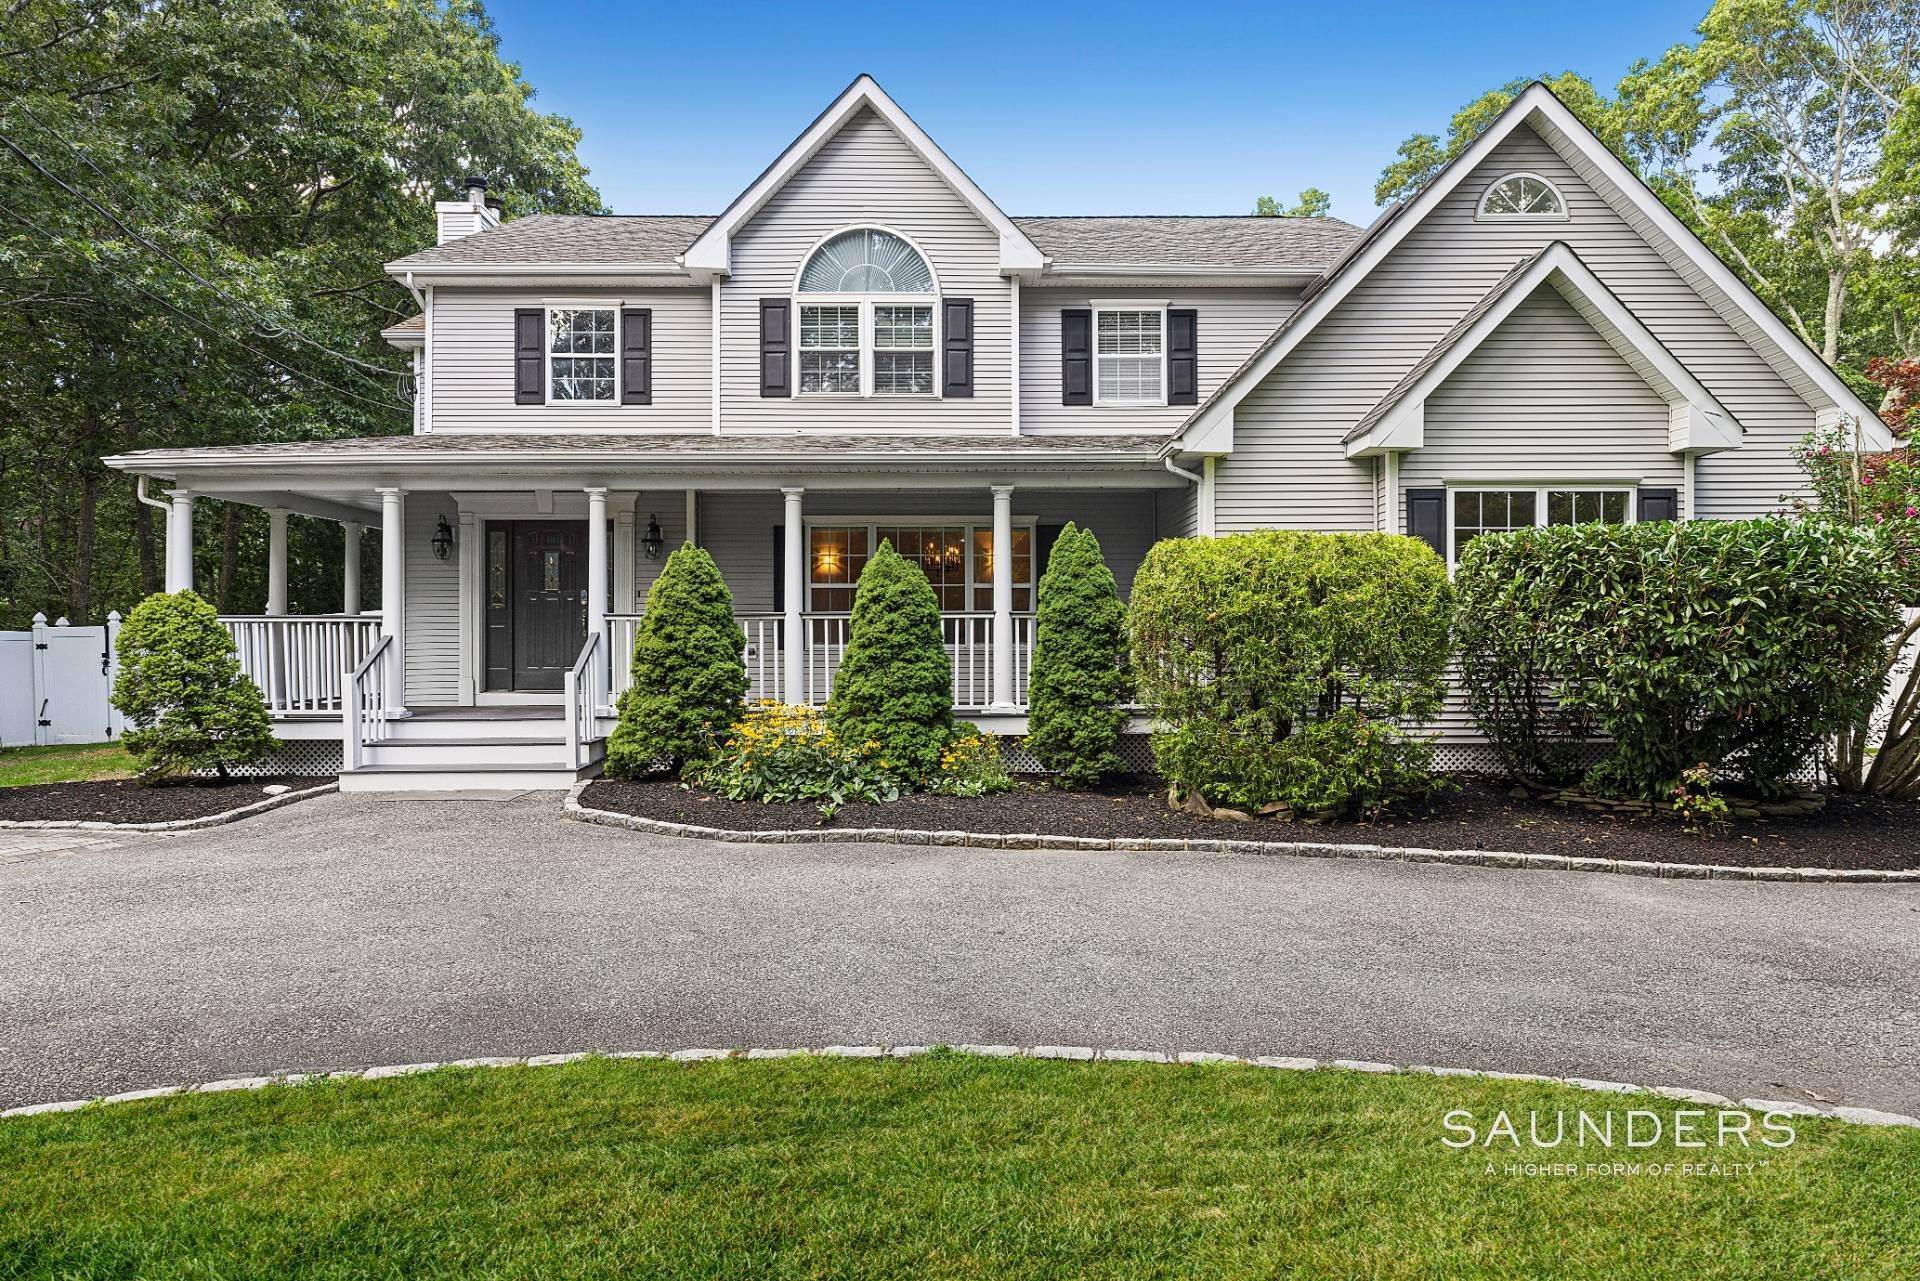 Single Family Homes at Refurbished In East Quogue 26 Squires Avenue, East Quogue, NY 11942